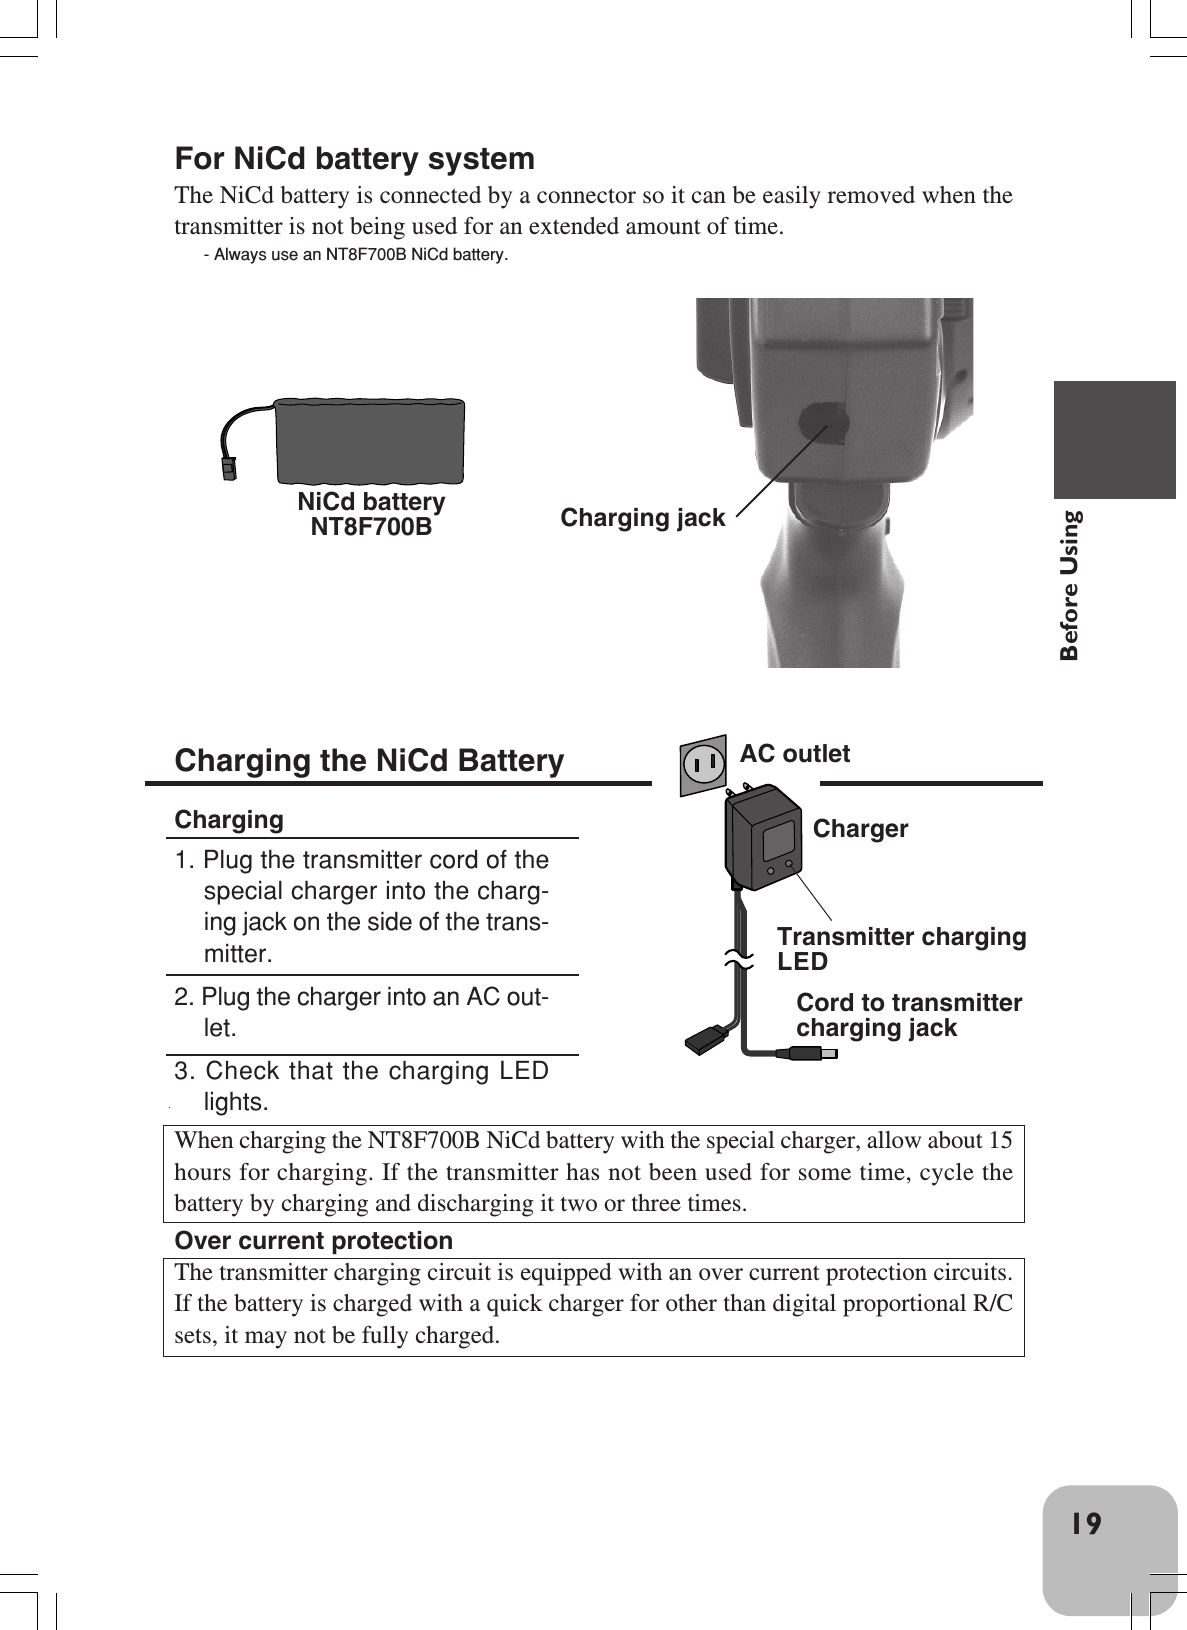 19Before UsingFor NiCd battery systemThe NiCd battery is connected by a connector so it can be easily removed when thetransmitter is not being used for an extended amount of time.- Always use an NT8F700B NiCd battery.NiCd batteryNT8F700BCharging the NiCd BatteryCharging1. Plug the transmitter cord of thespecial charger into the charg-ing jack on the side of the trans-mitter.2. Plug the charger into an AC out-let.3. Check that the charging LEDlights.ChargerTransmitter chargingLEDCord to transmittercharging jackWhen charging the NT8F700B NiCd battery with the special charger, allow about 15hours for charging. If the transmitter has not been used for some time, cycle thebattery by charging and discharging it two or three times.Over current protectionThe transmitter charging circuit is equipped with an over current protection circuits.If the battery is charged with a quick charger for other than digital proportional R/Csets, it may not be fully charged.AC outletCharging jack